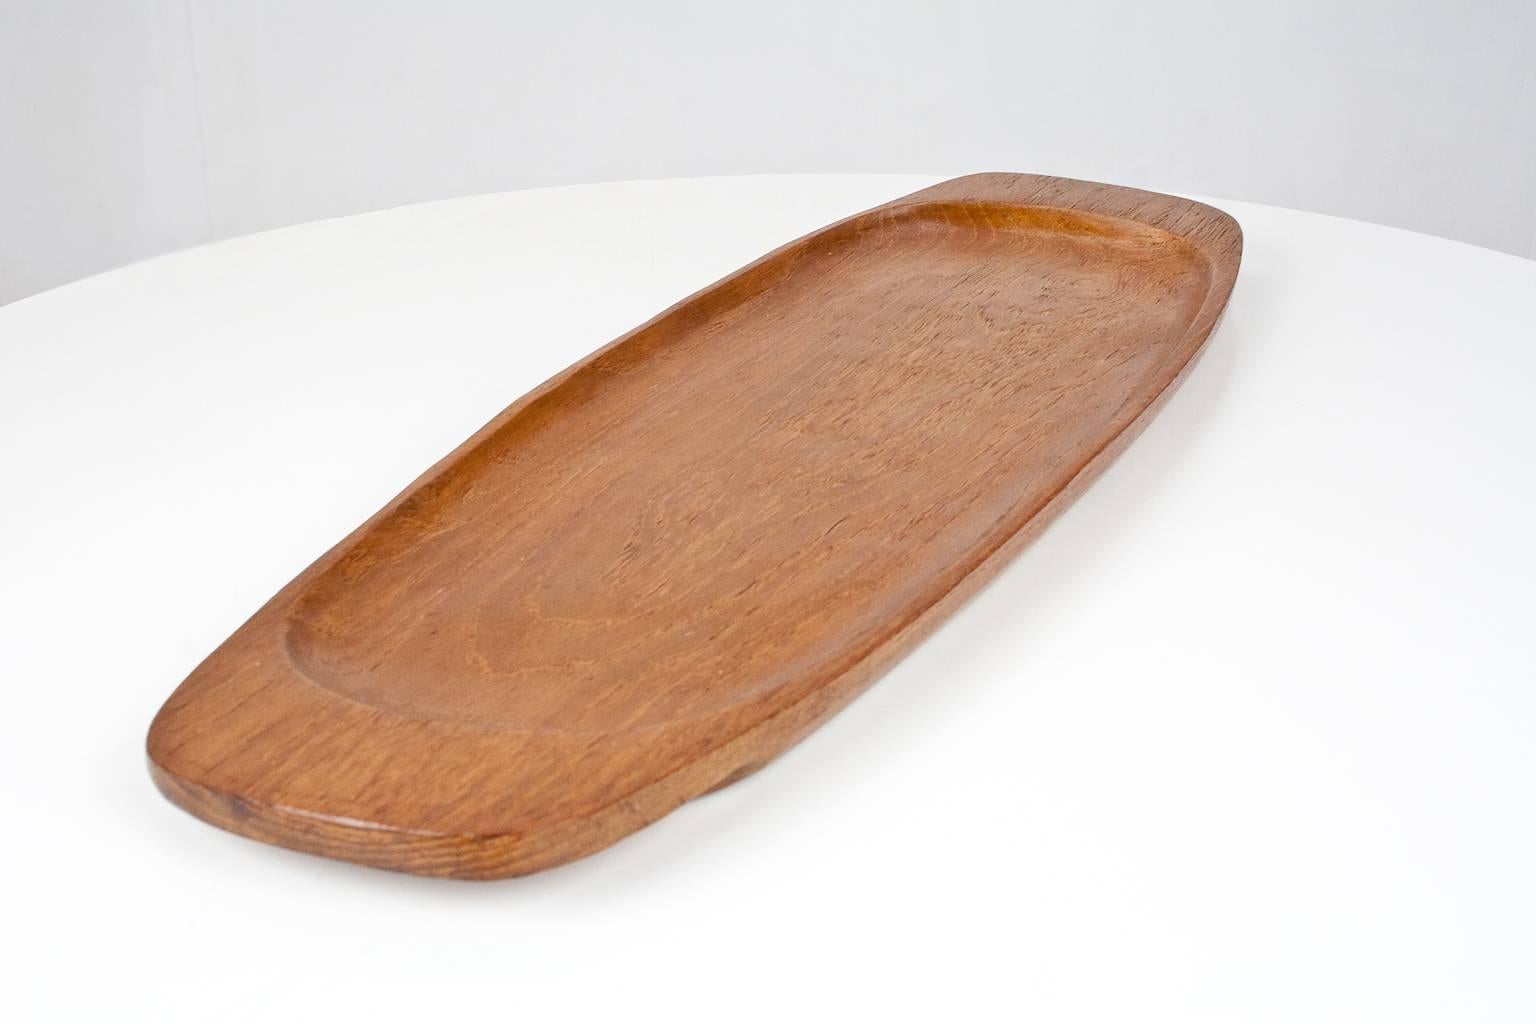 Mid-Century Modern large (61.5cm) Danish hand sculptured teak platter or tray. Beautiful table or desk accessory in excellent condition. Originated from the 1960s Denmark, designer unknown, but in the tradition of Jens Quistgaard and Richard Nissen.